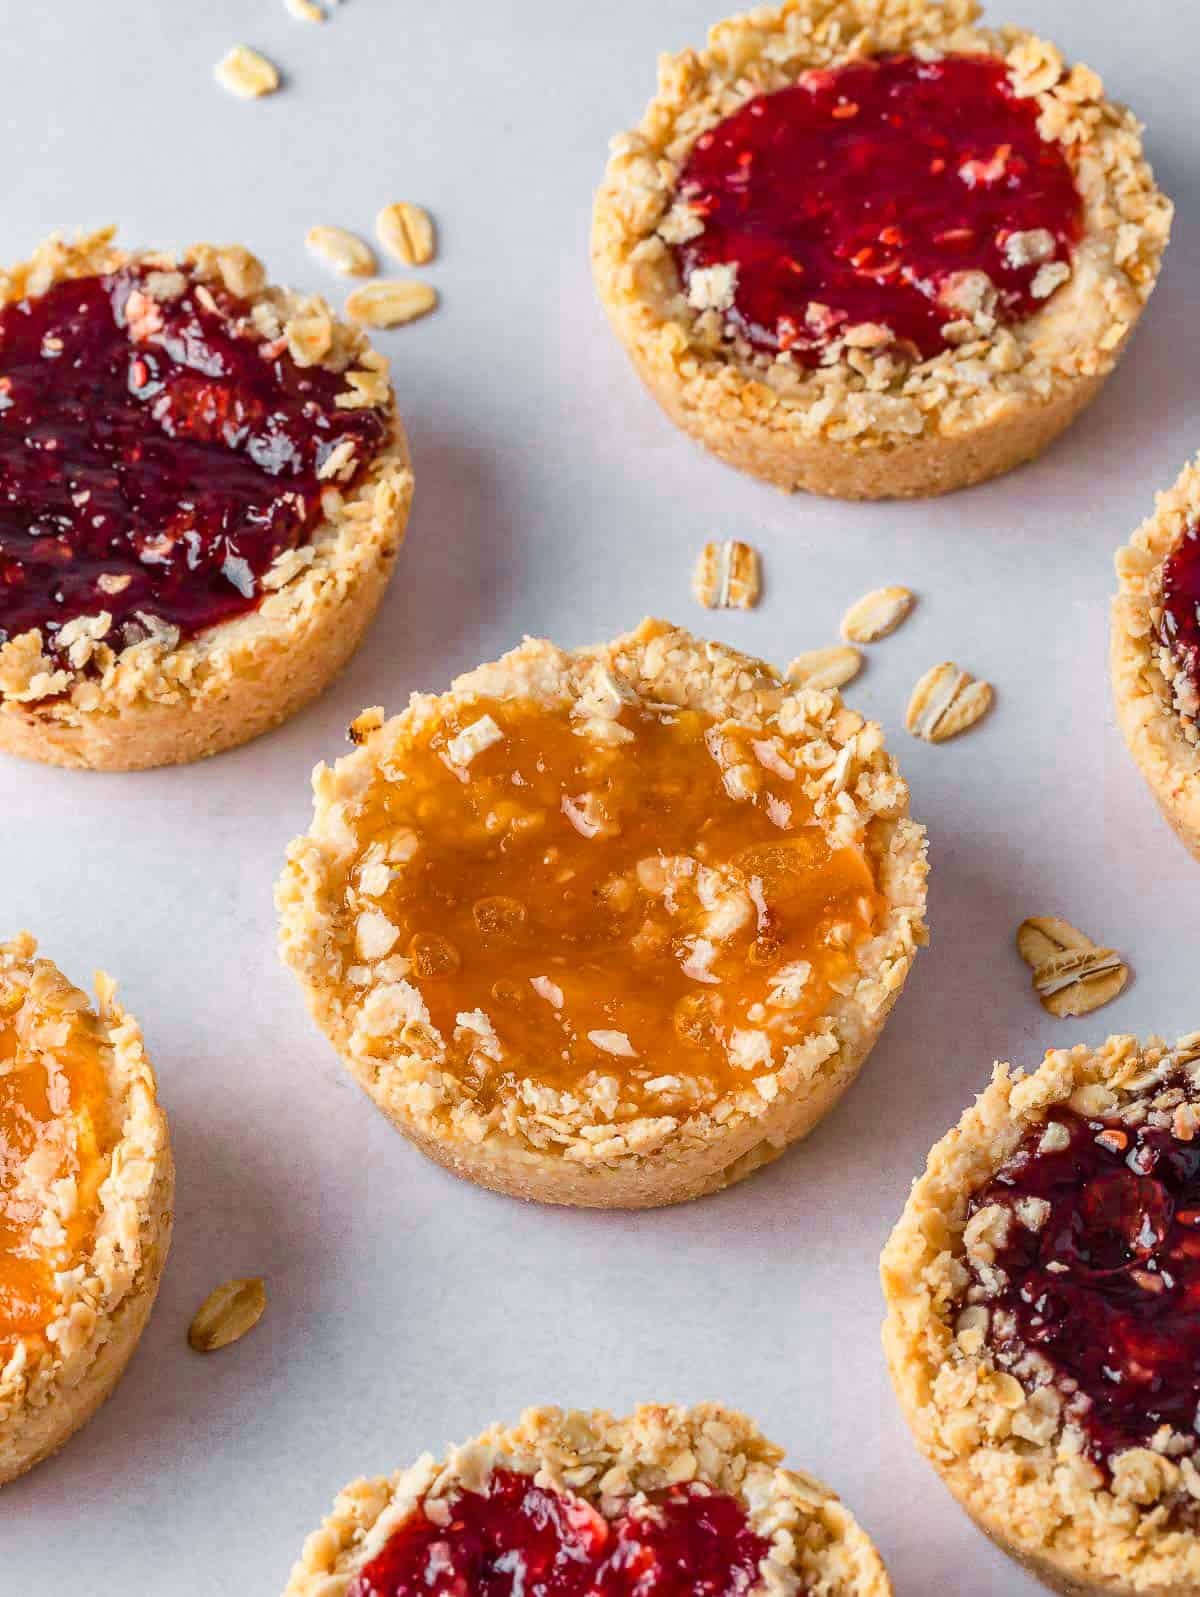 Oatmeal jam biscuits on a tray.